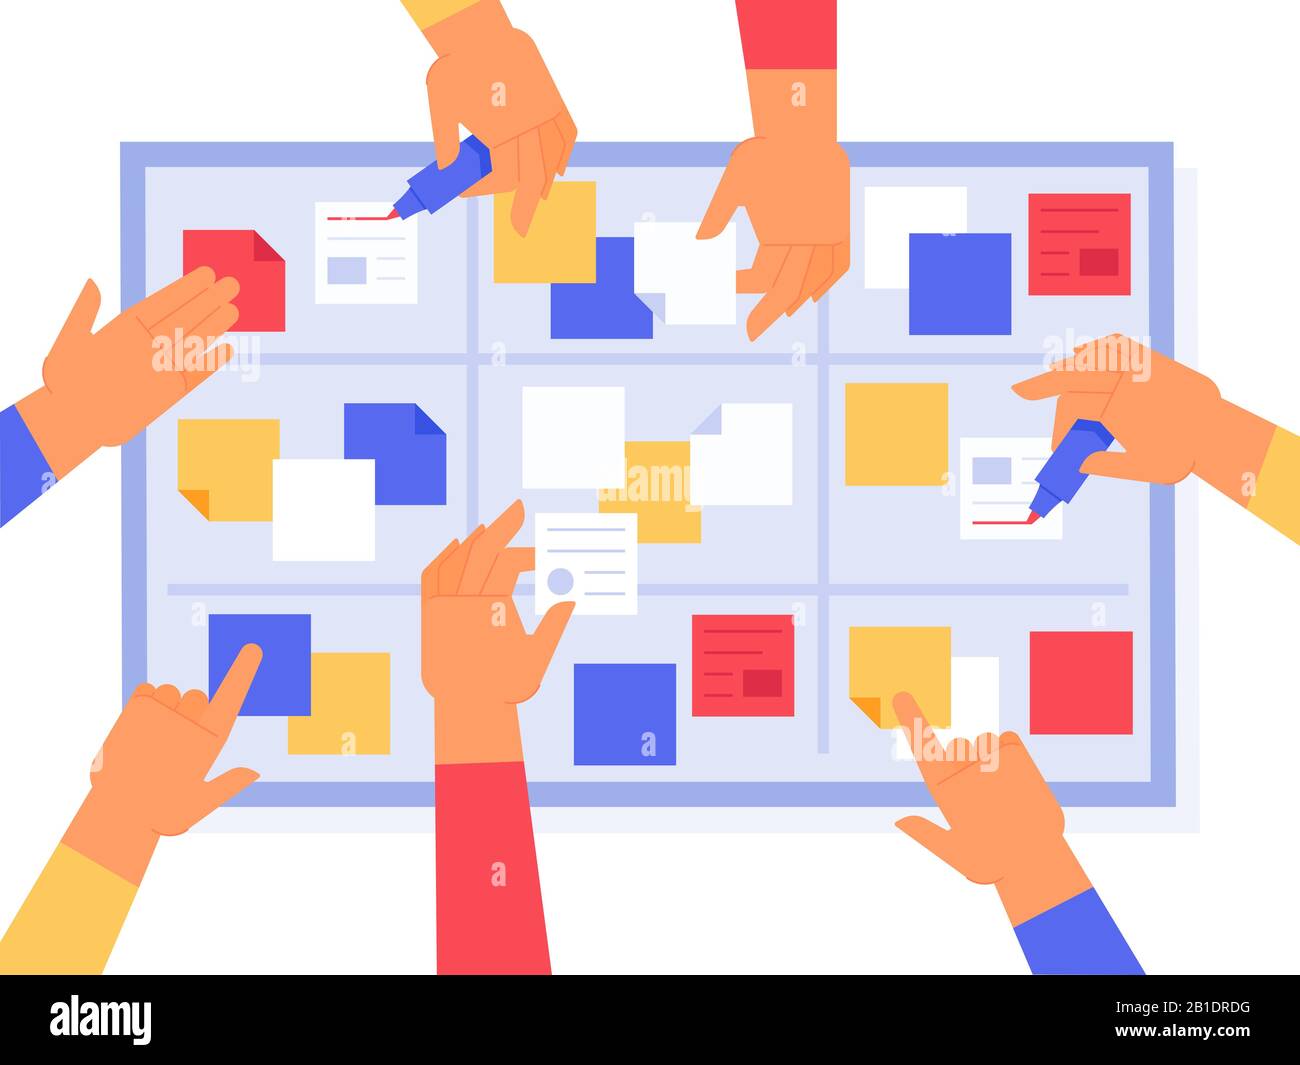 Agile board. Scrum sprints tasks, kanban work management and priority project status. Business strategy daily task vector illustration Stock Vector